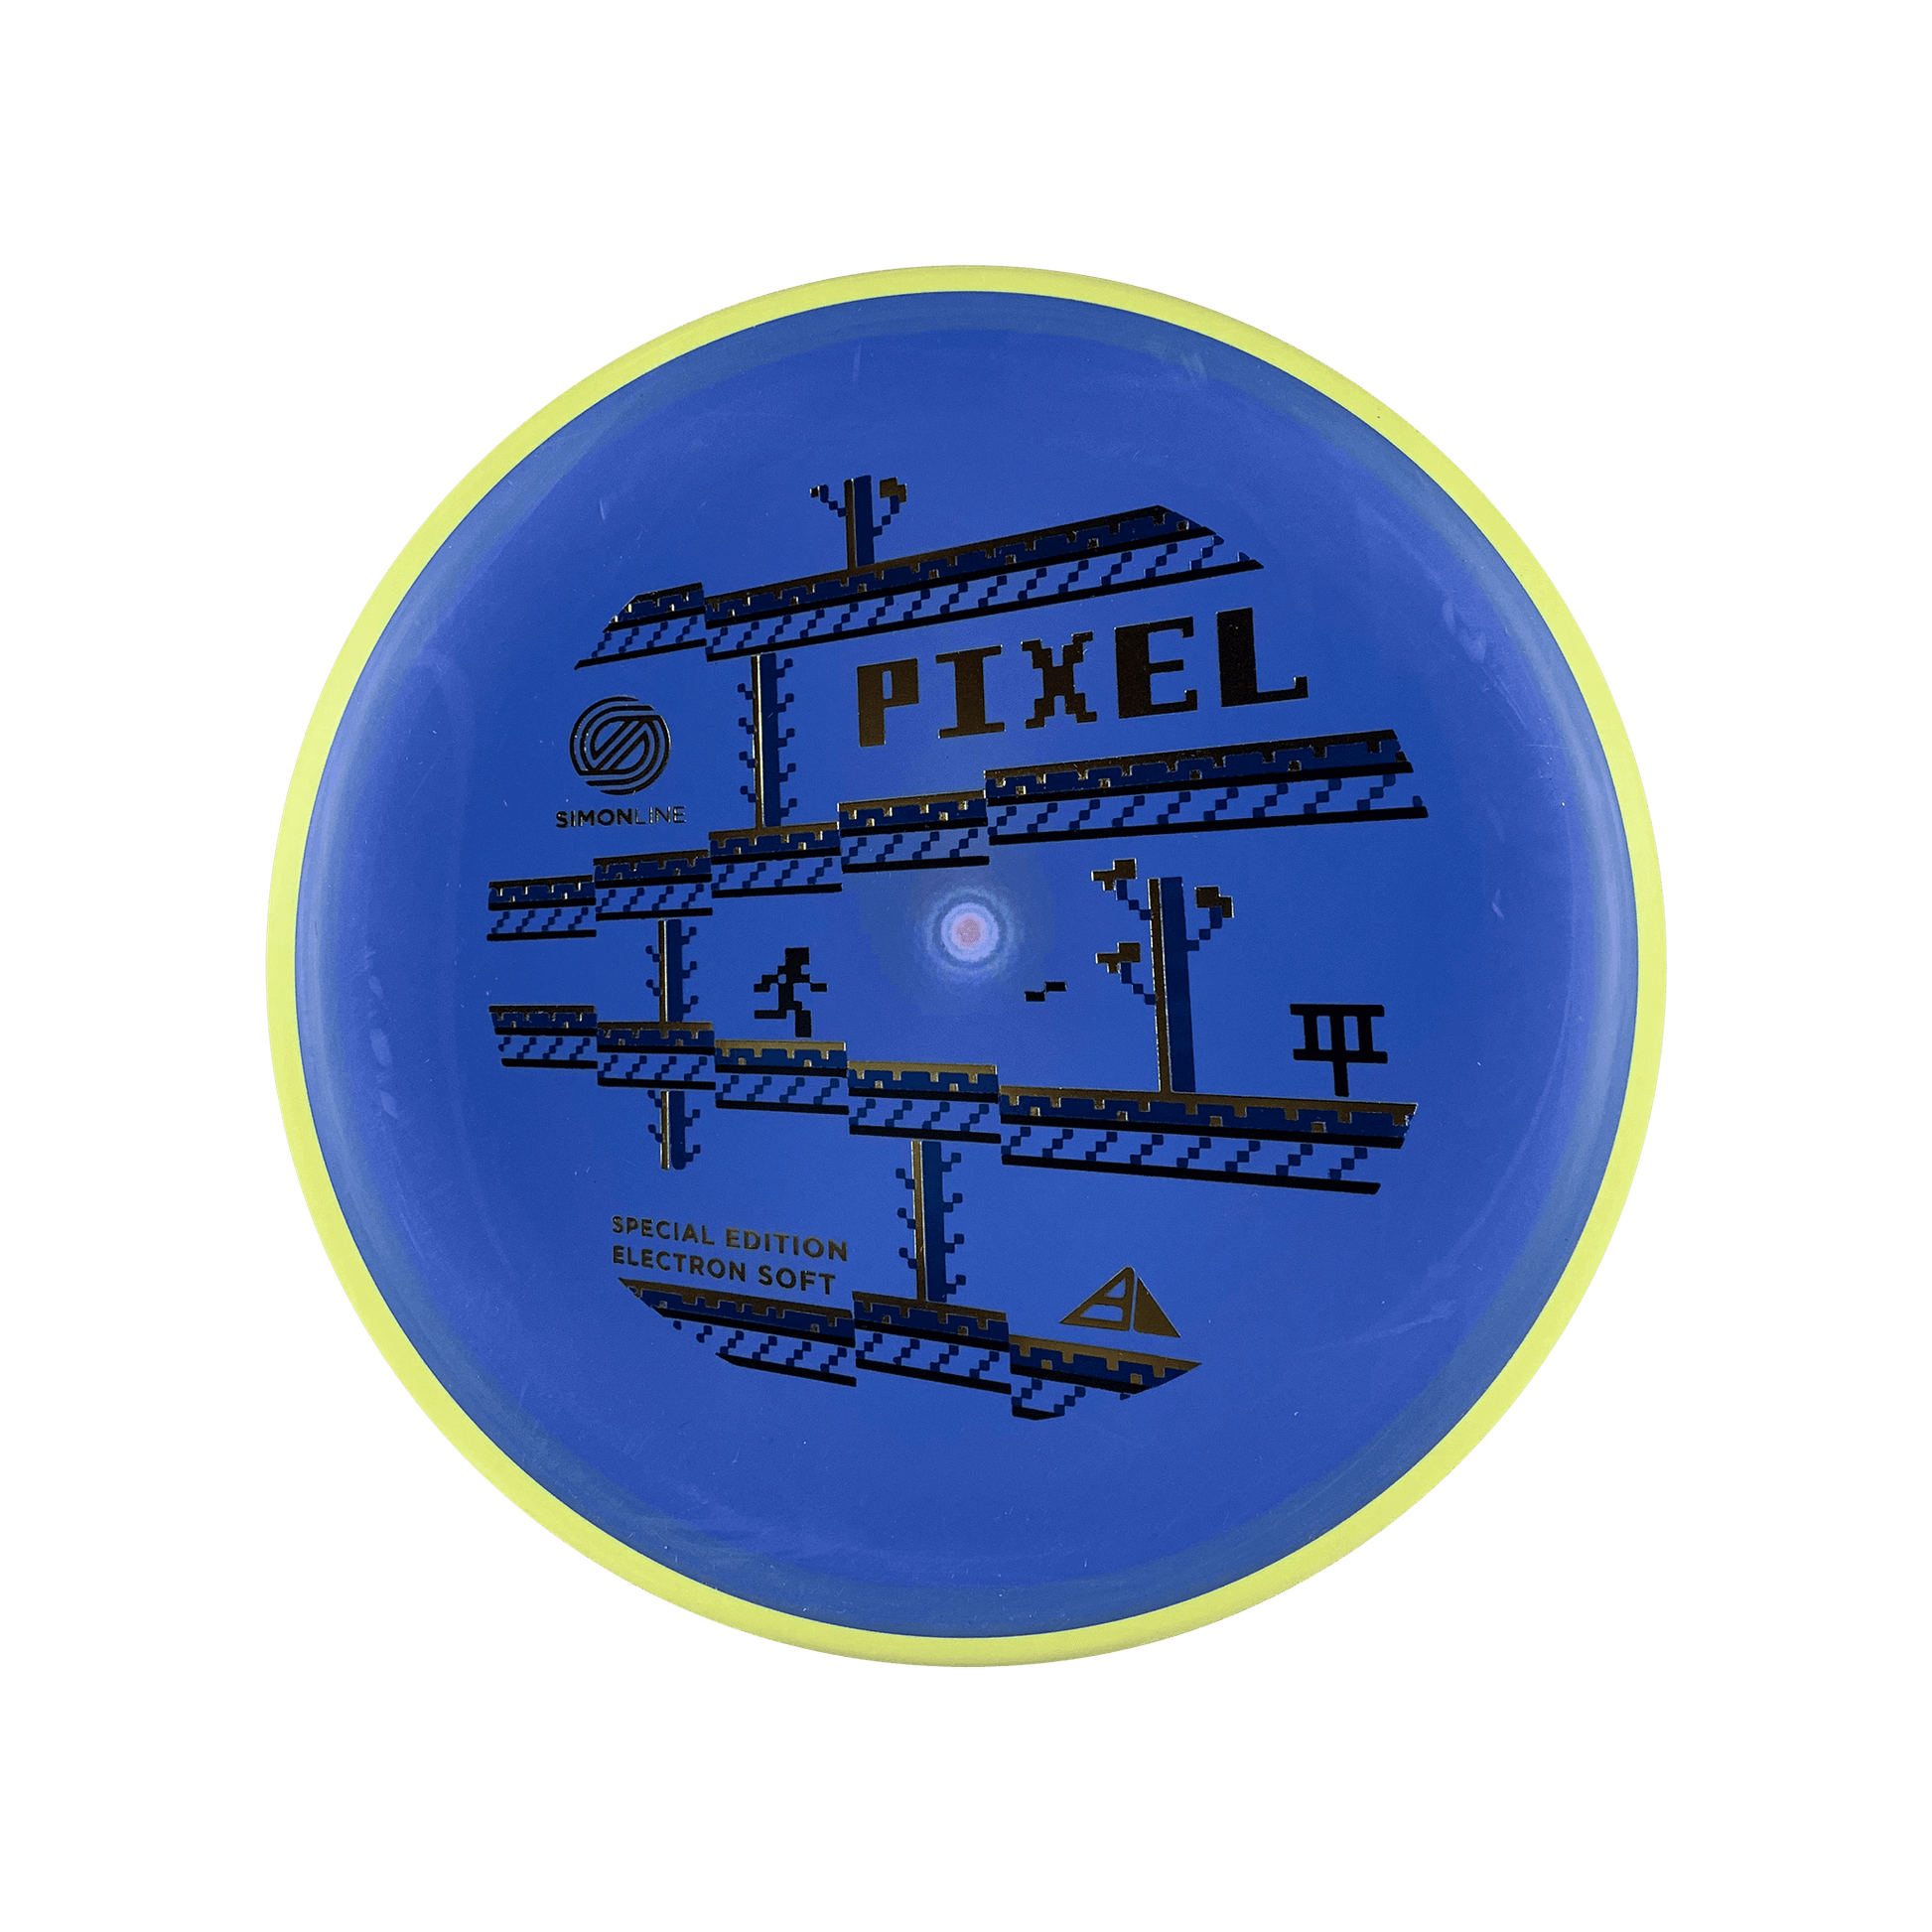 Electron Soft Pixel - Special Edition Disc Axiom multi / blue 173 